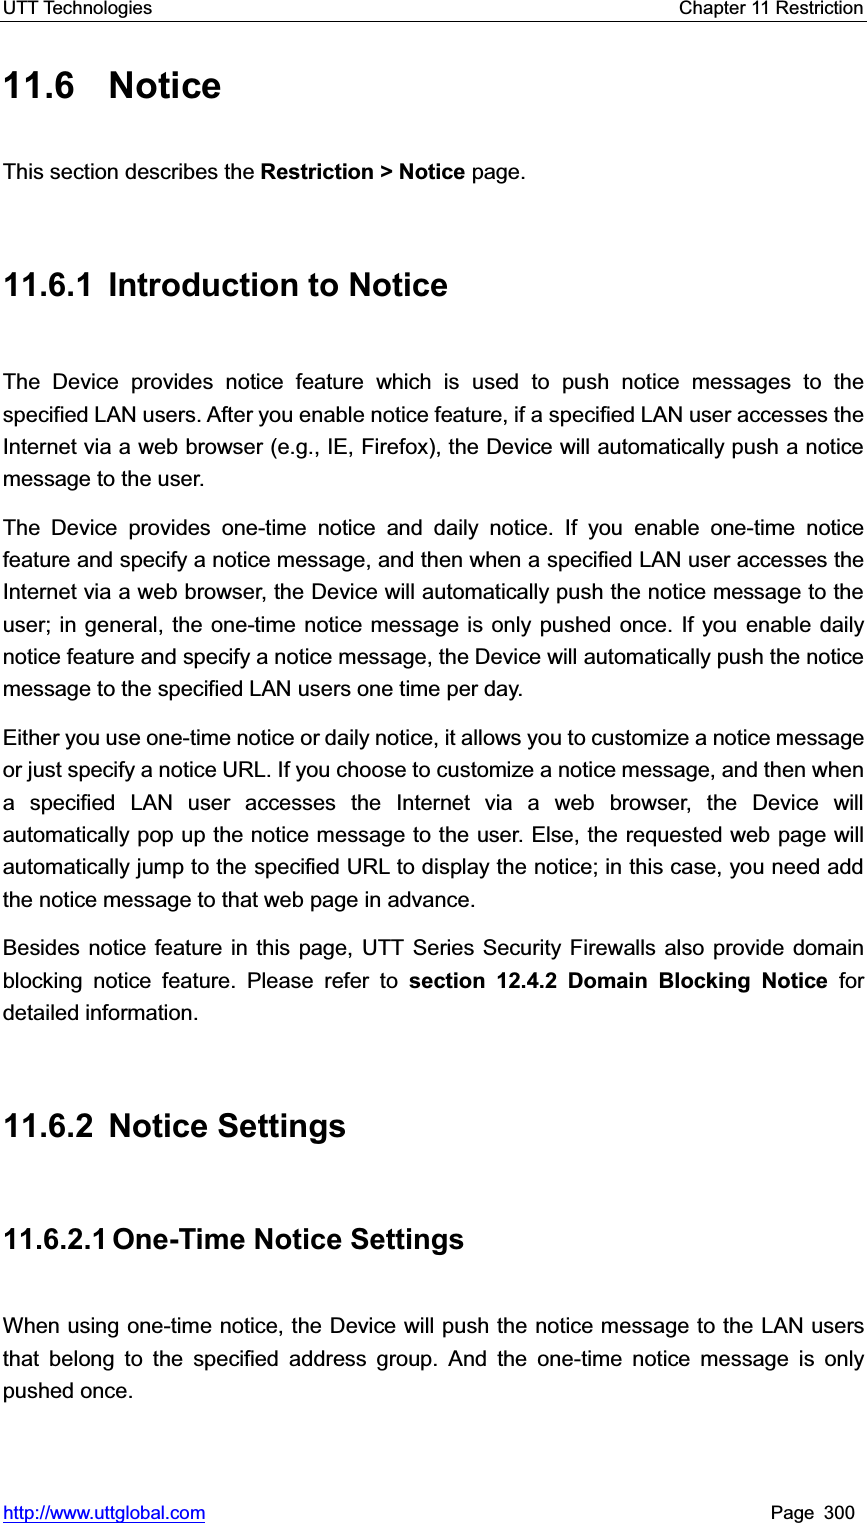 UTT Technologies    Chapter 11 Restriction   http://www.uttglobal.com Page 300 11.6 Notice This section describes the Restriction &gt; Notice page. 11.6.1 Introduction to Notice The Device provides notice feature which is used to push notice messages to the specified LAN users. After you enable notice feature, if a specified LAN user accesses the Internet via a web browser (e.g., IE, Firefox), the Device will automatically push a notice message to the user.   The Device provides one-time notice and daily notice. If you enable one-time notice feature and specify a notice message, and then when a specified LAN user accesses the Internet via a web browser, the Device will automatically push the notice message to the user; in general, the one-time notice message is only pushed once. If you enable daily notice feature and specify a notice message, the Device will automatically push the notice message to the specified LAN users one time per day.   Either you use one-time notice or daily notice, it allows you to customize a notice message or just specify a notice URL. If you choose to customize a notice message, and then when a specified LAN user accesses the Internet via a web browser, the Device will automatically pop up the notice message to the user. Else, the requested web page will automatically jump to the specified URL to display the notice; in this case, you need add the notice message to that web page in advance.     Besides notice feature in this page, UTT Series Security Firewalls also provide domain blocking notice feature. Please refer to section 12.4.2 Domain Blocking Notice for detailed information. 11.6.2 Notice Settings 11.6.2.1 One-Time Notice  Settings When using one-time notice, the Device will push the notice message to the LAN users that belong to the specified address group. And the one-time notice message is only pushed once.   